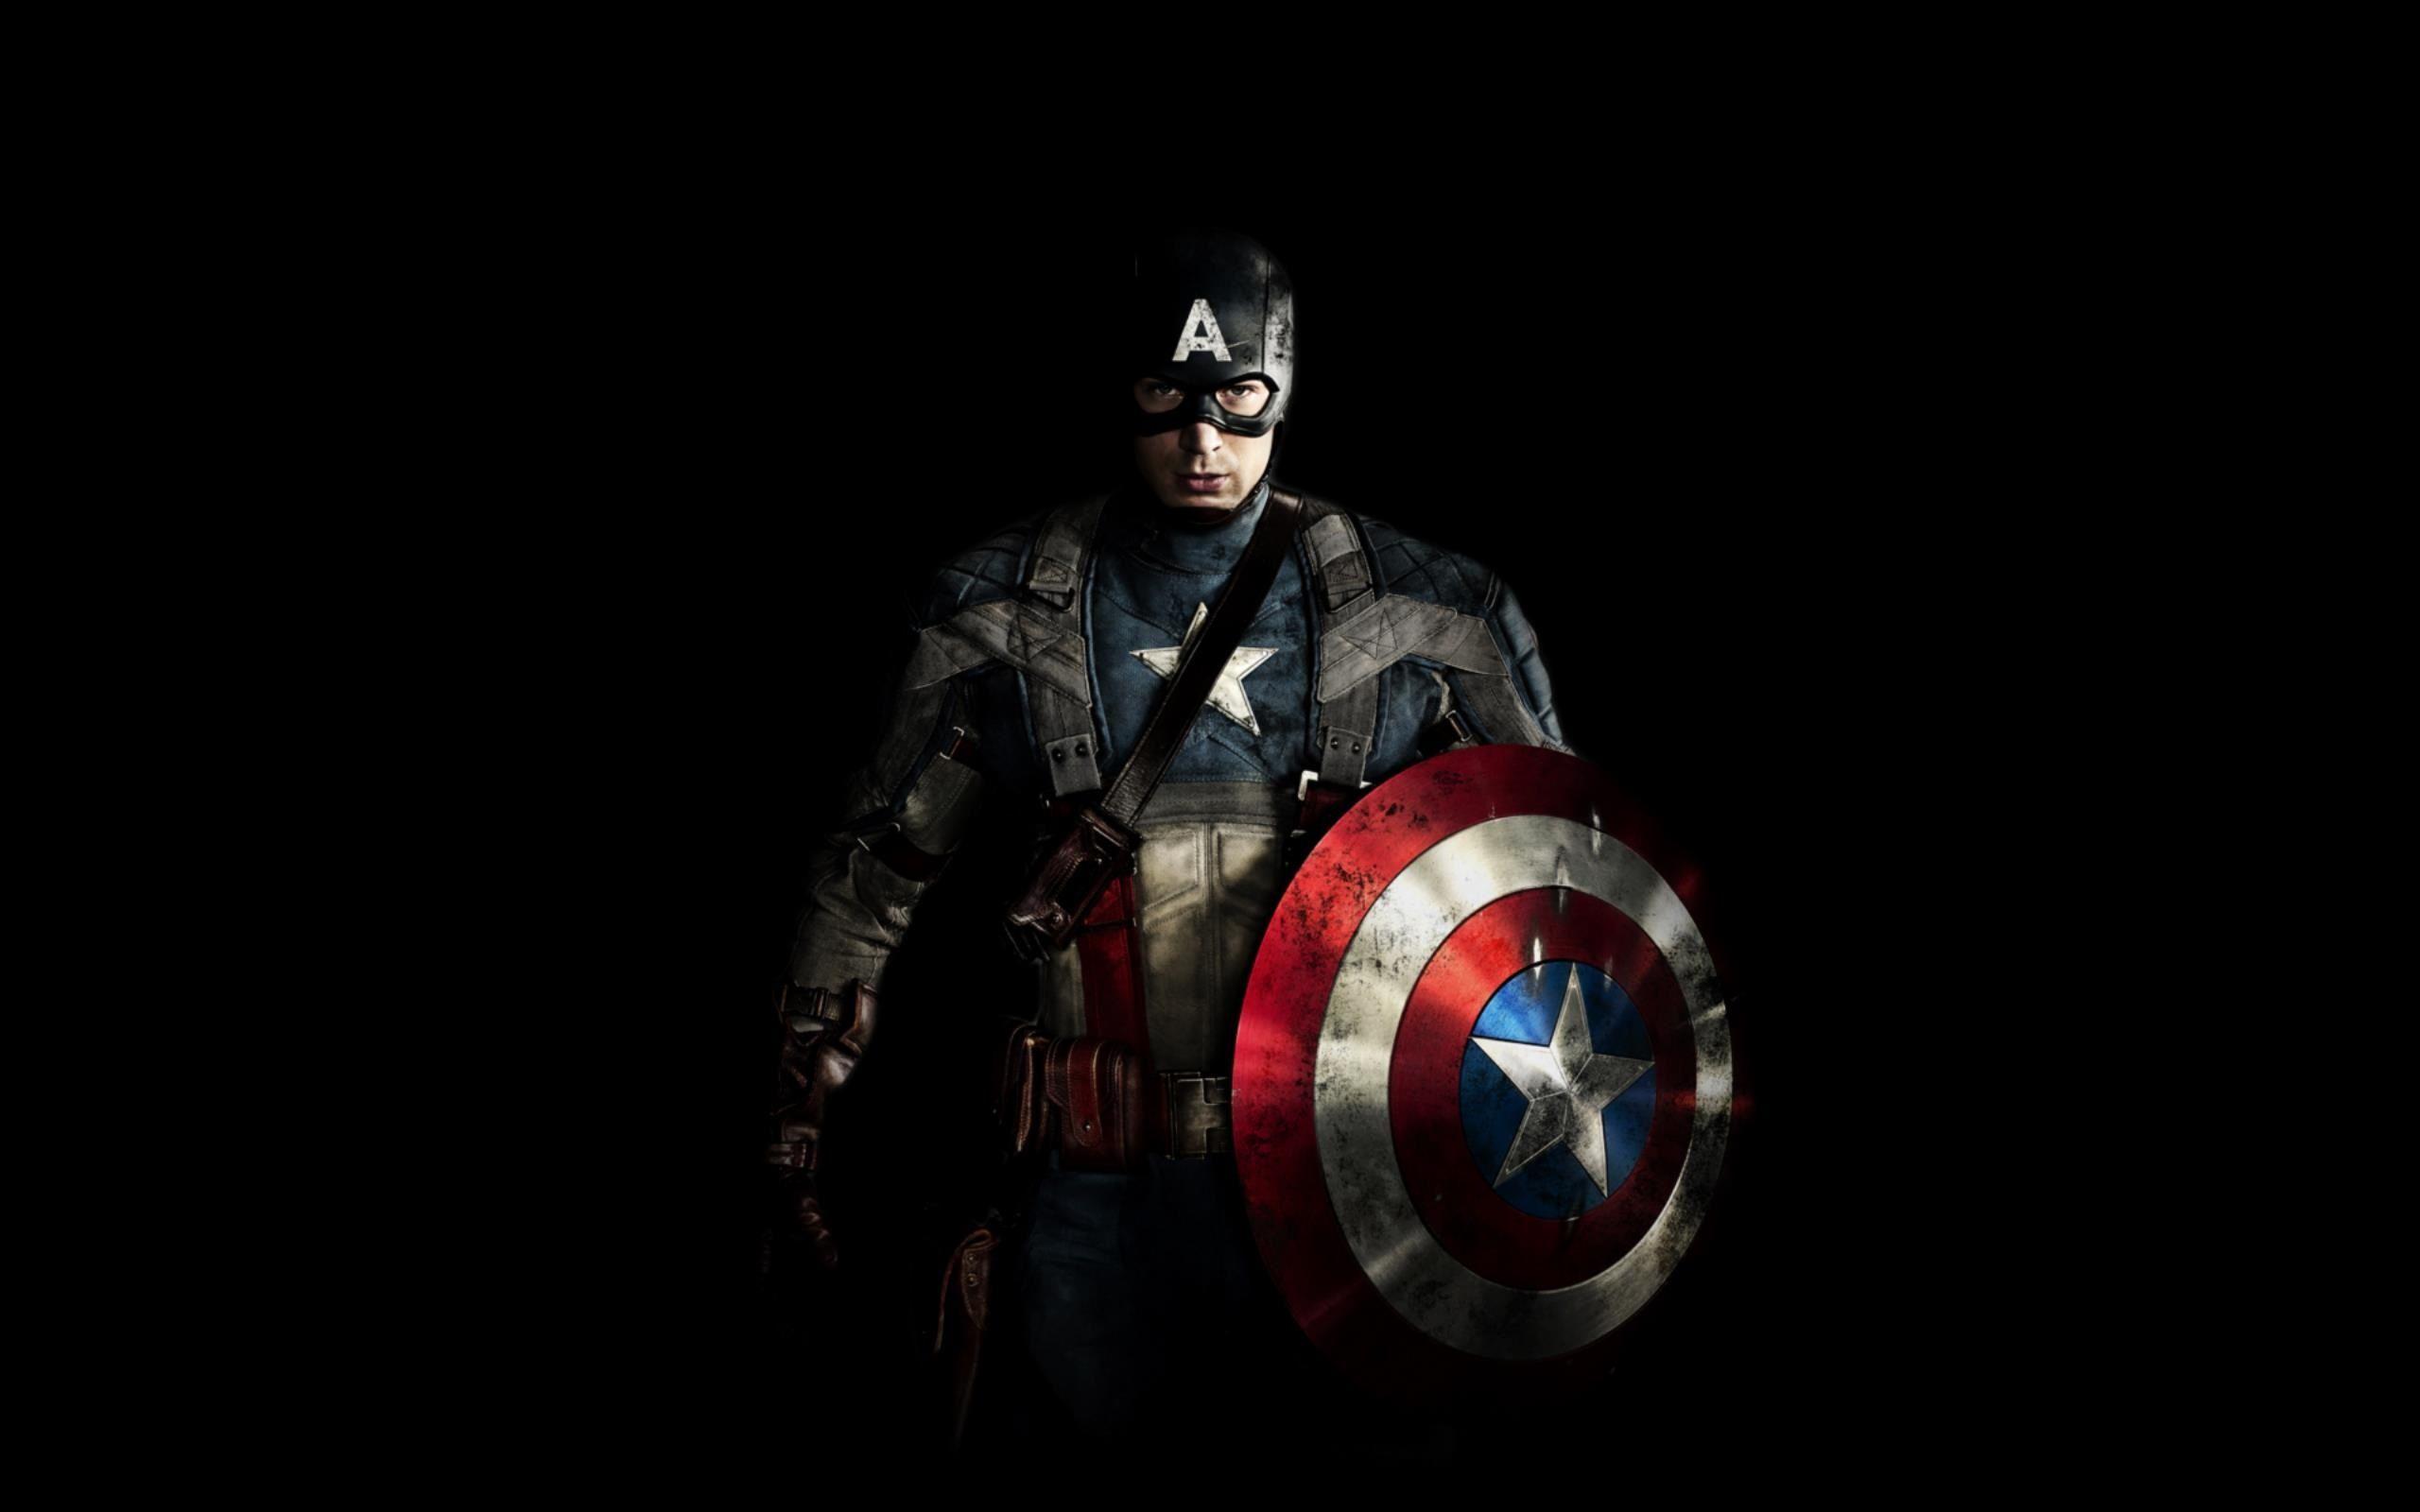 HD image of Captain America standing tall and and waving the flag